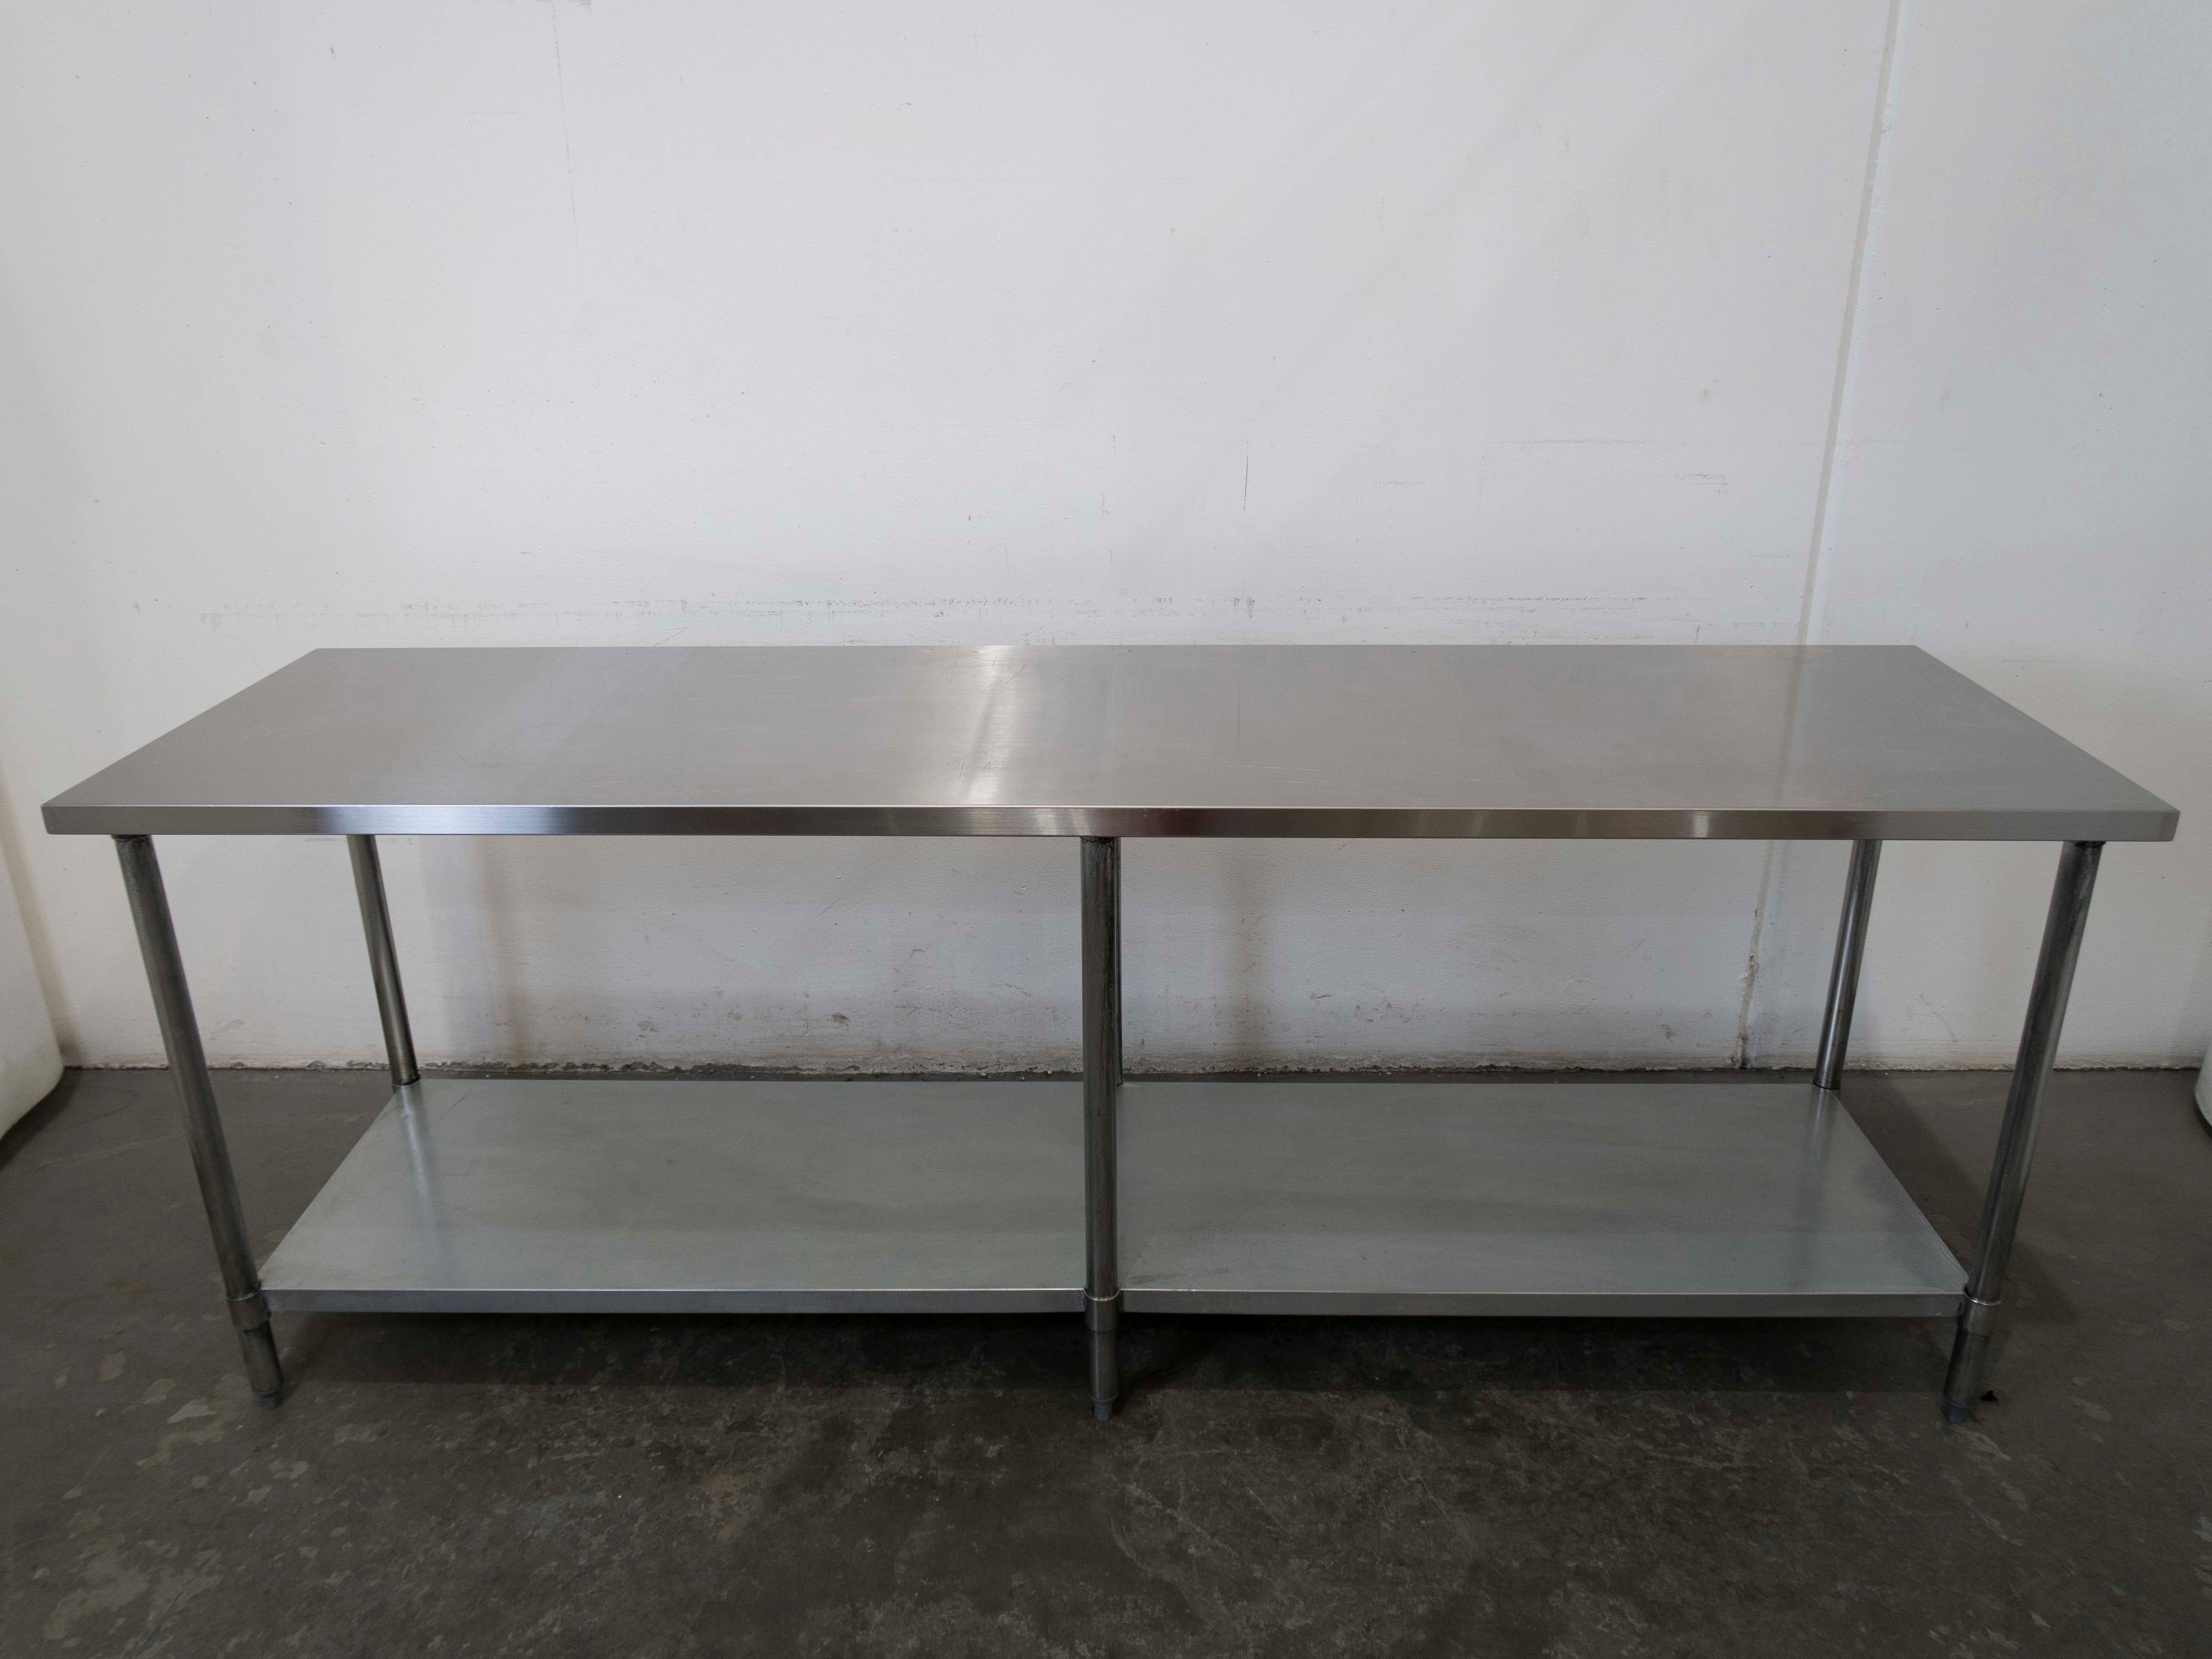 Thumbnail - Stainless Steel Bench